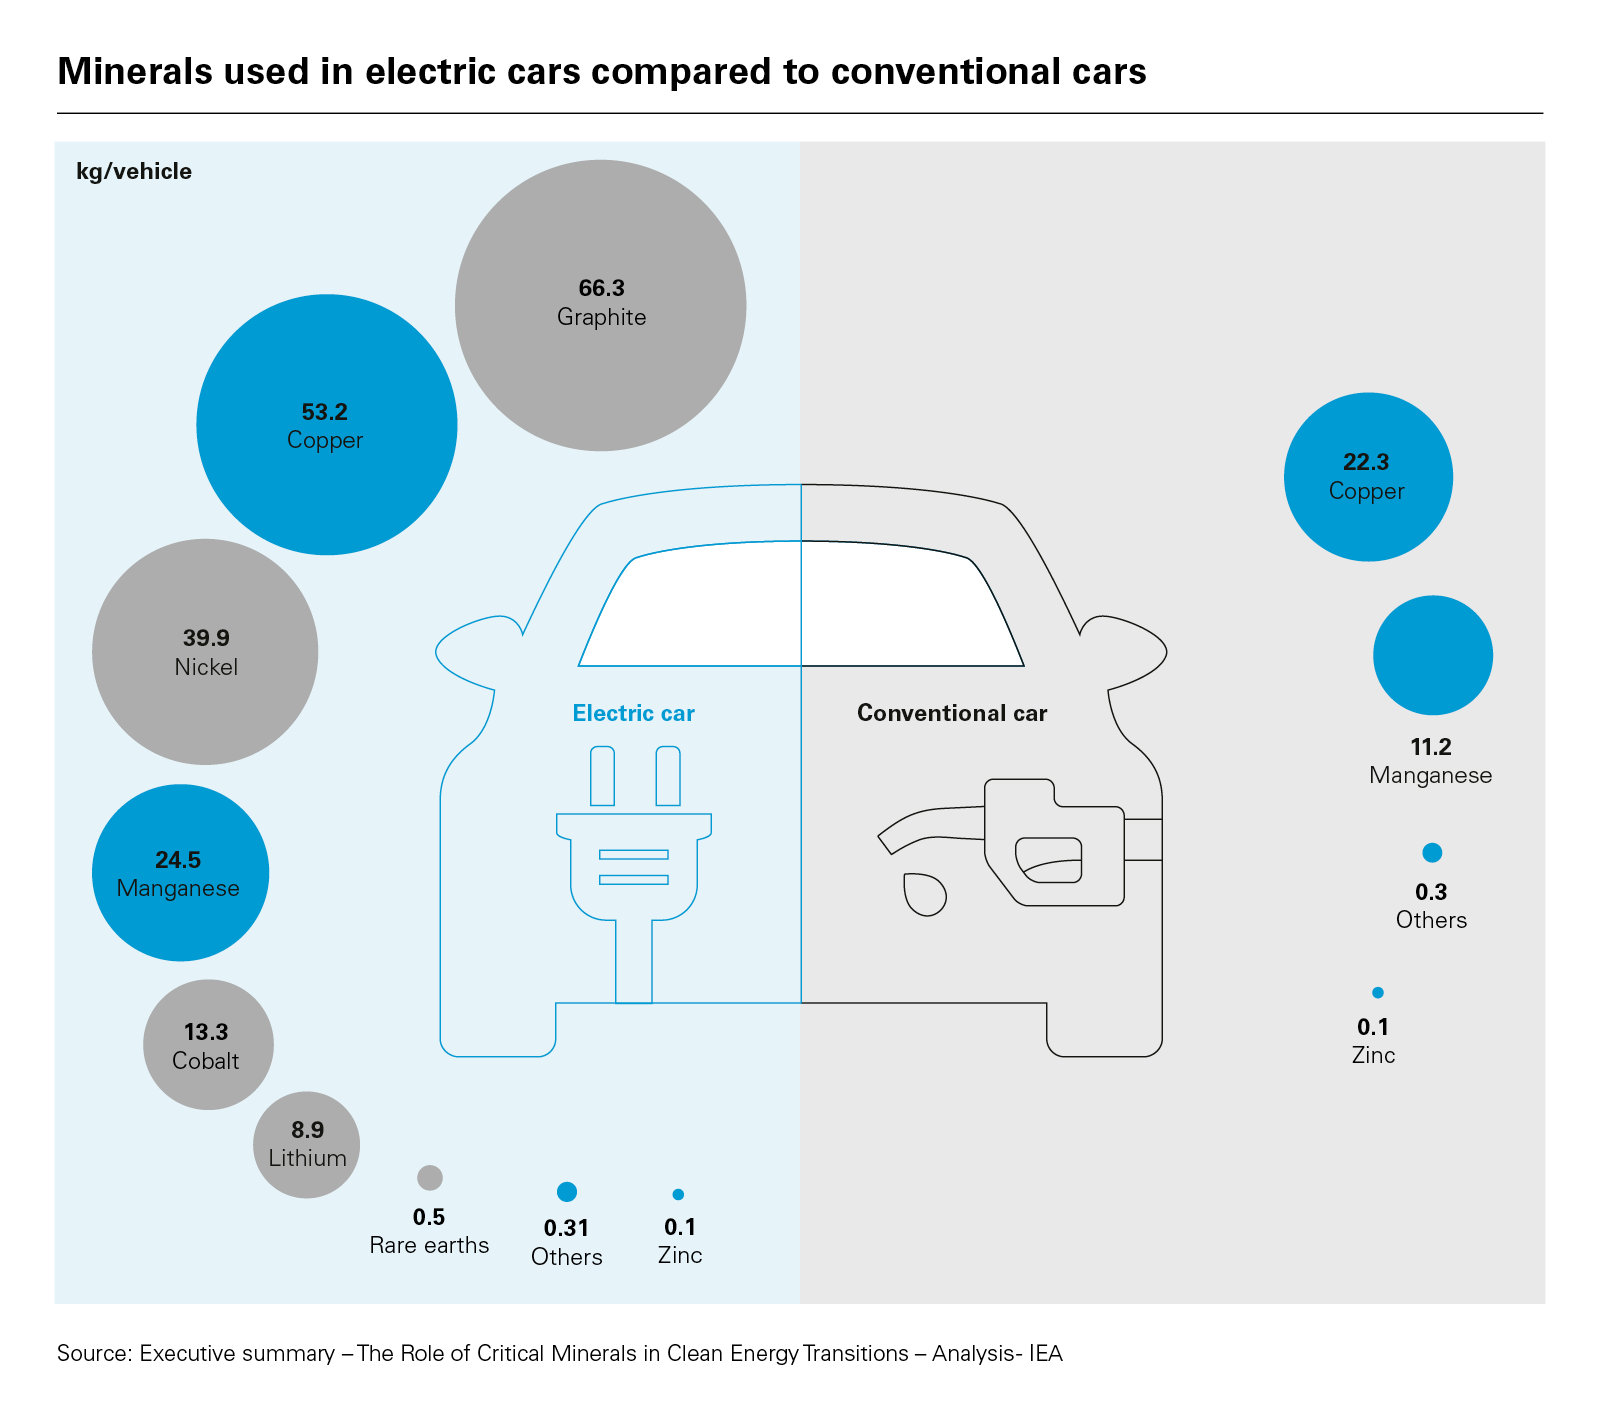 Minerals used in electric cars compared to conventional cars